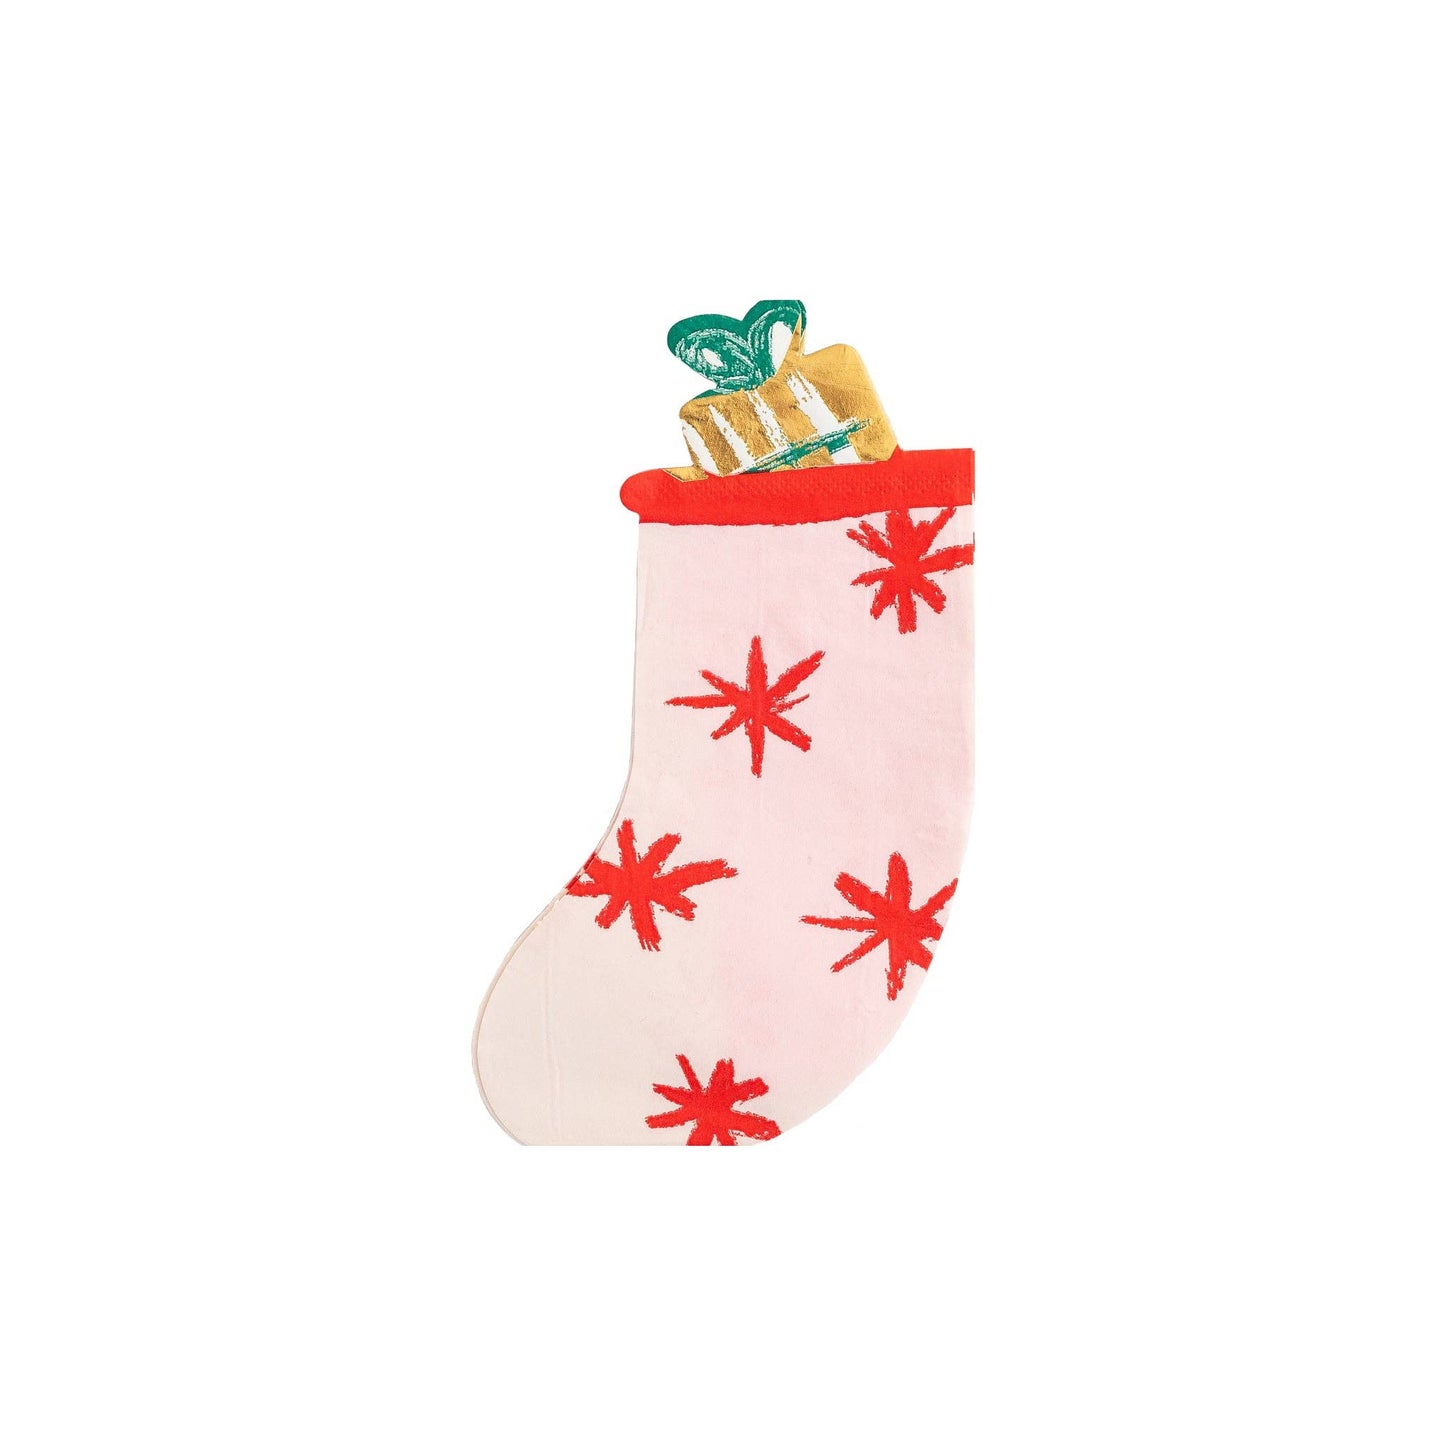 CHW939 - Christmas Wishes Stocking Shaped Guest Napkin